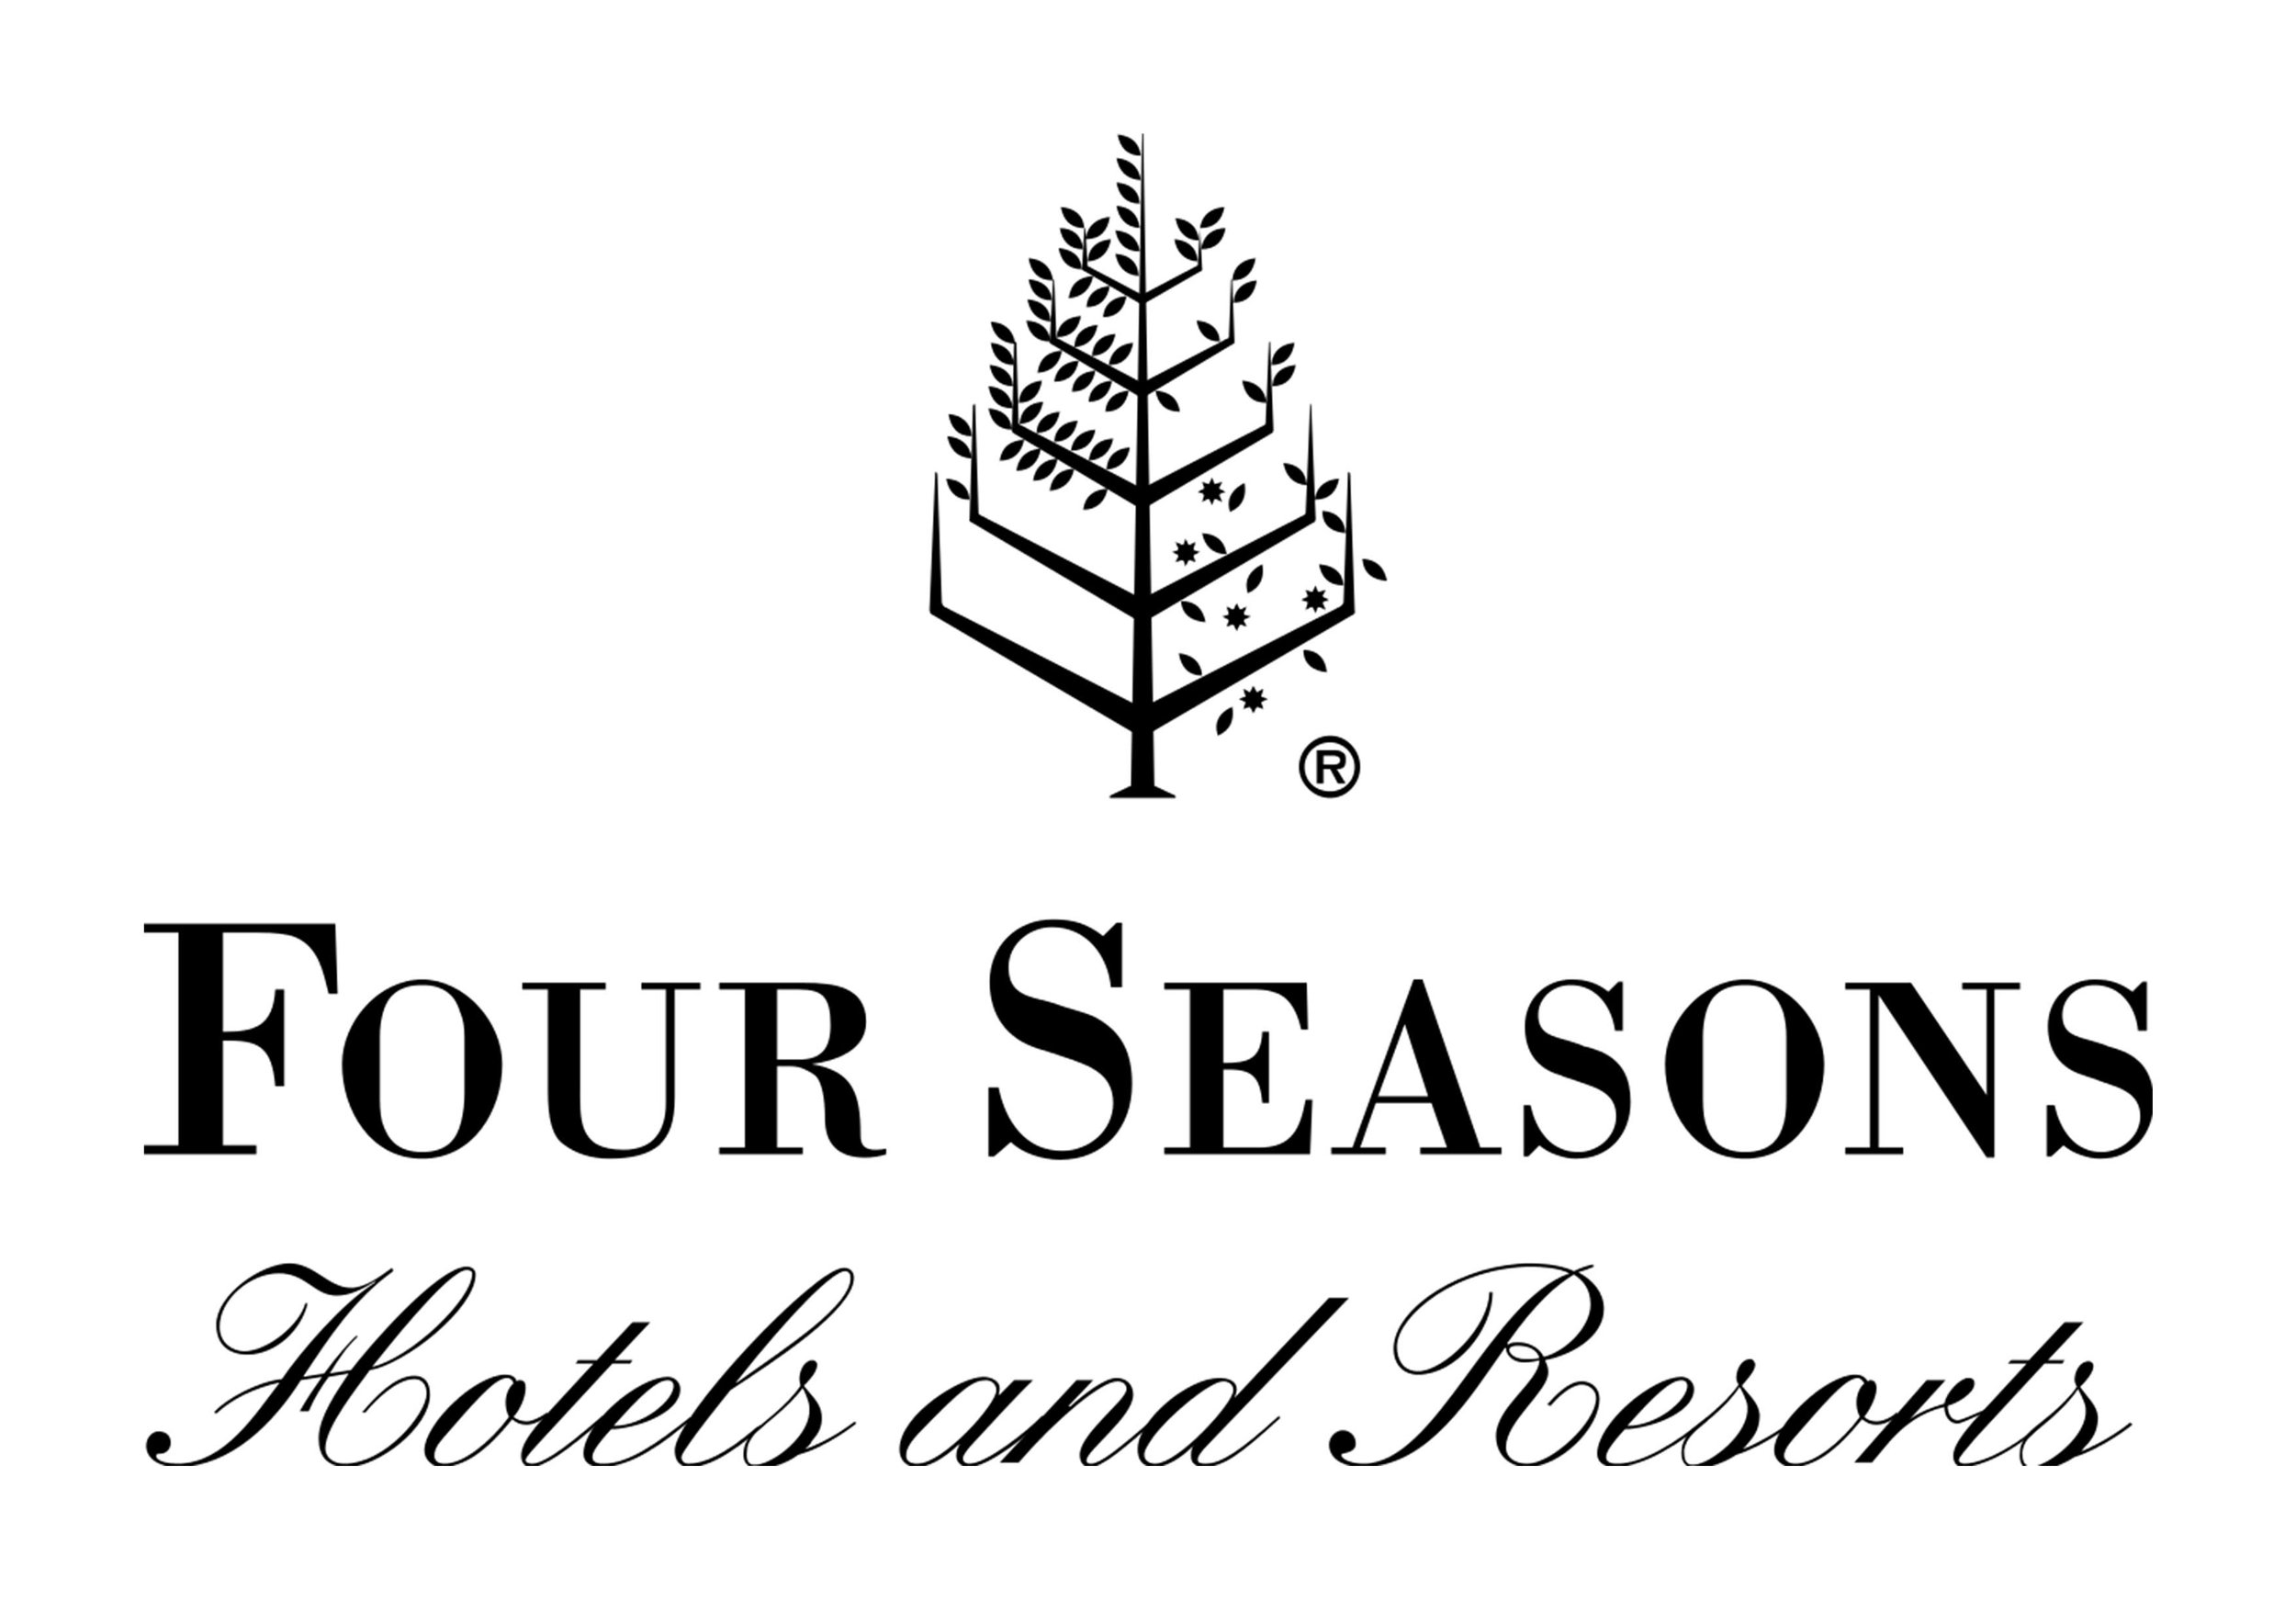  ..  Four seasons hotels and resorts 